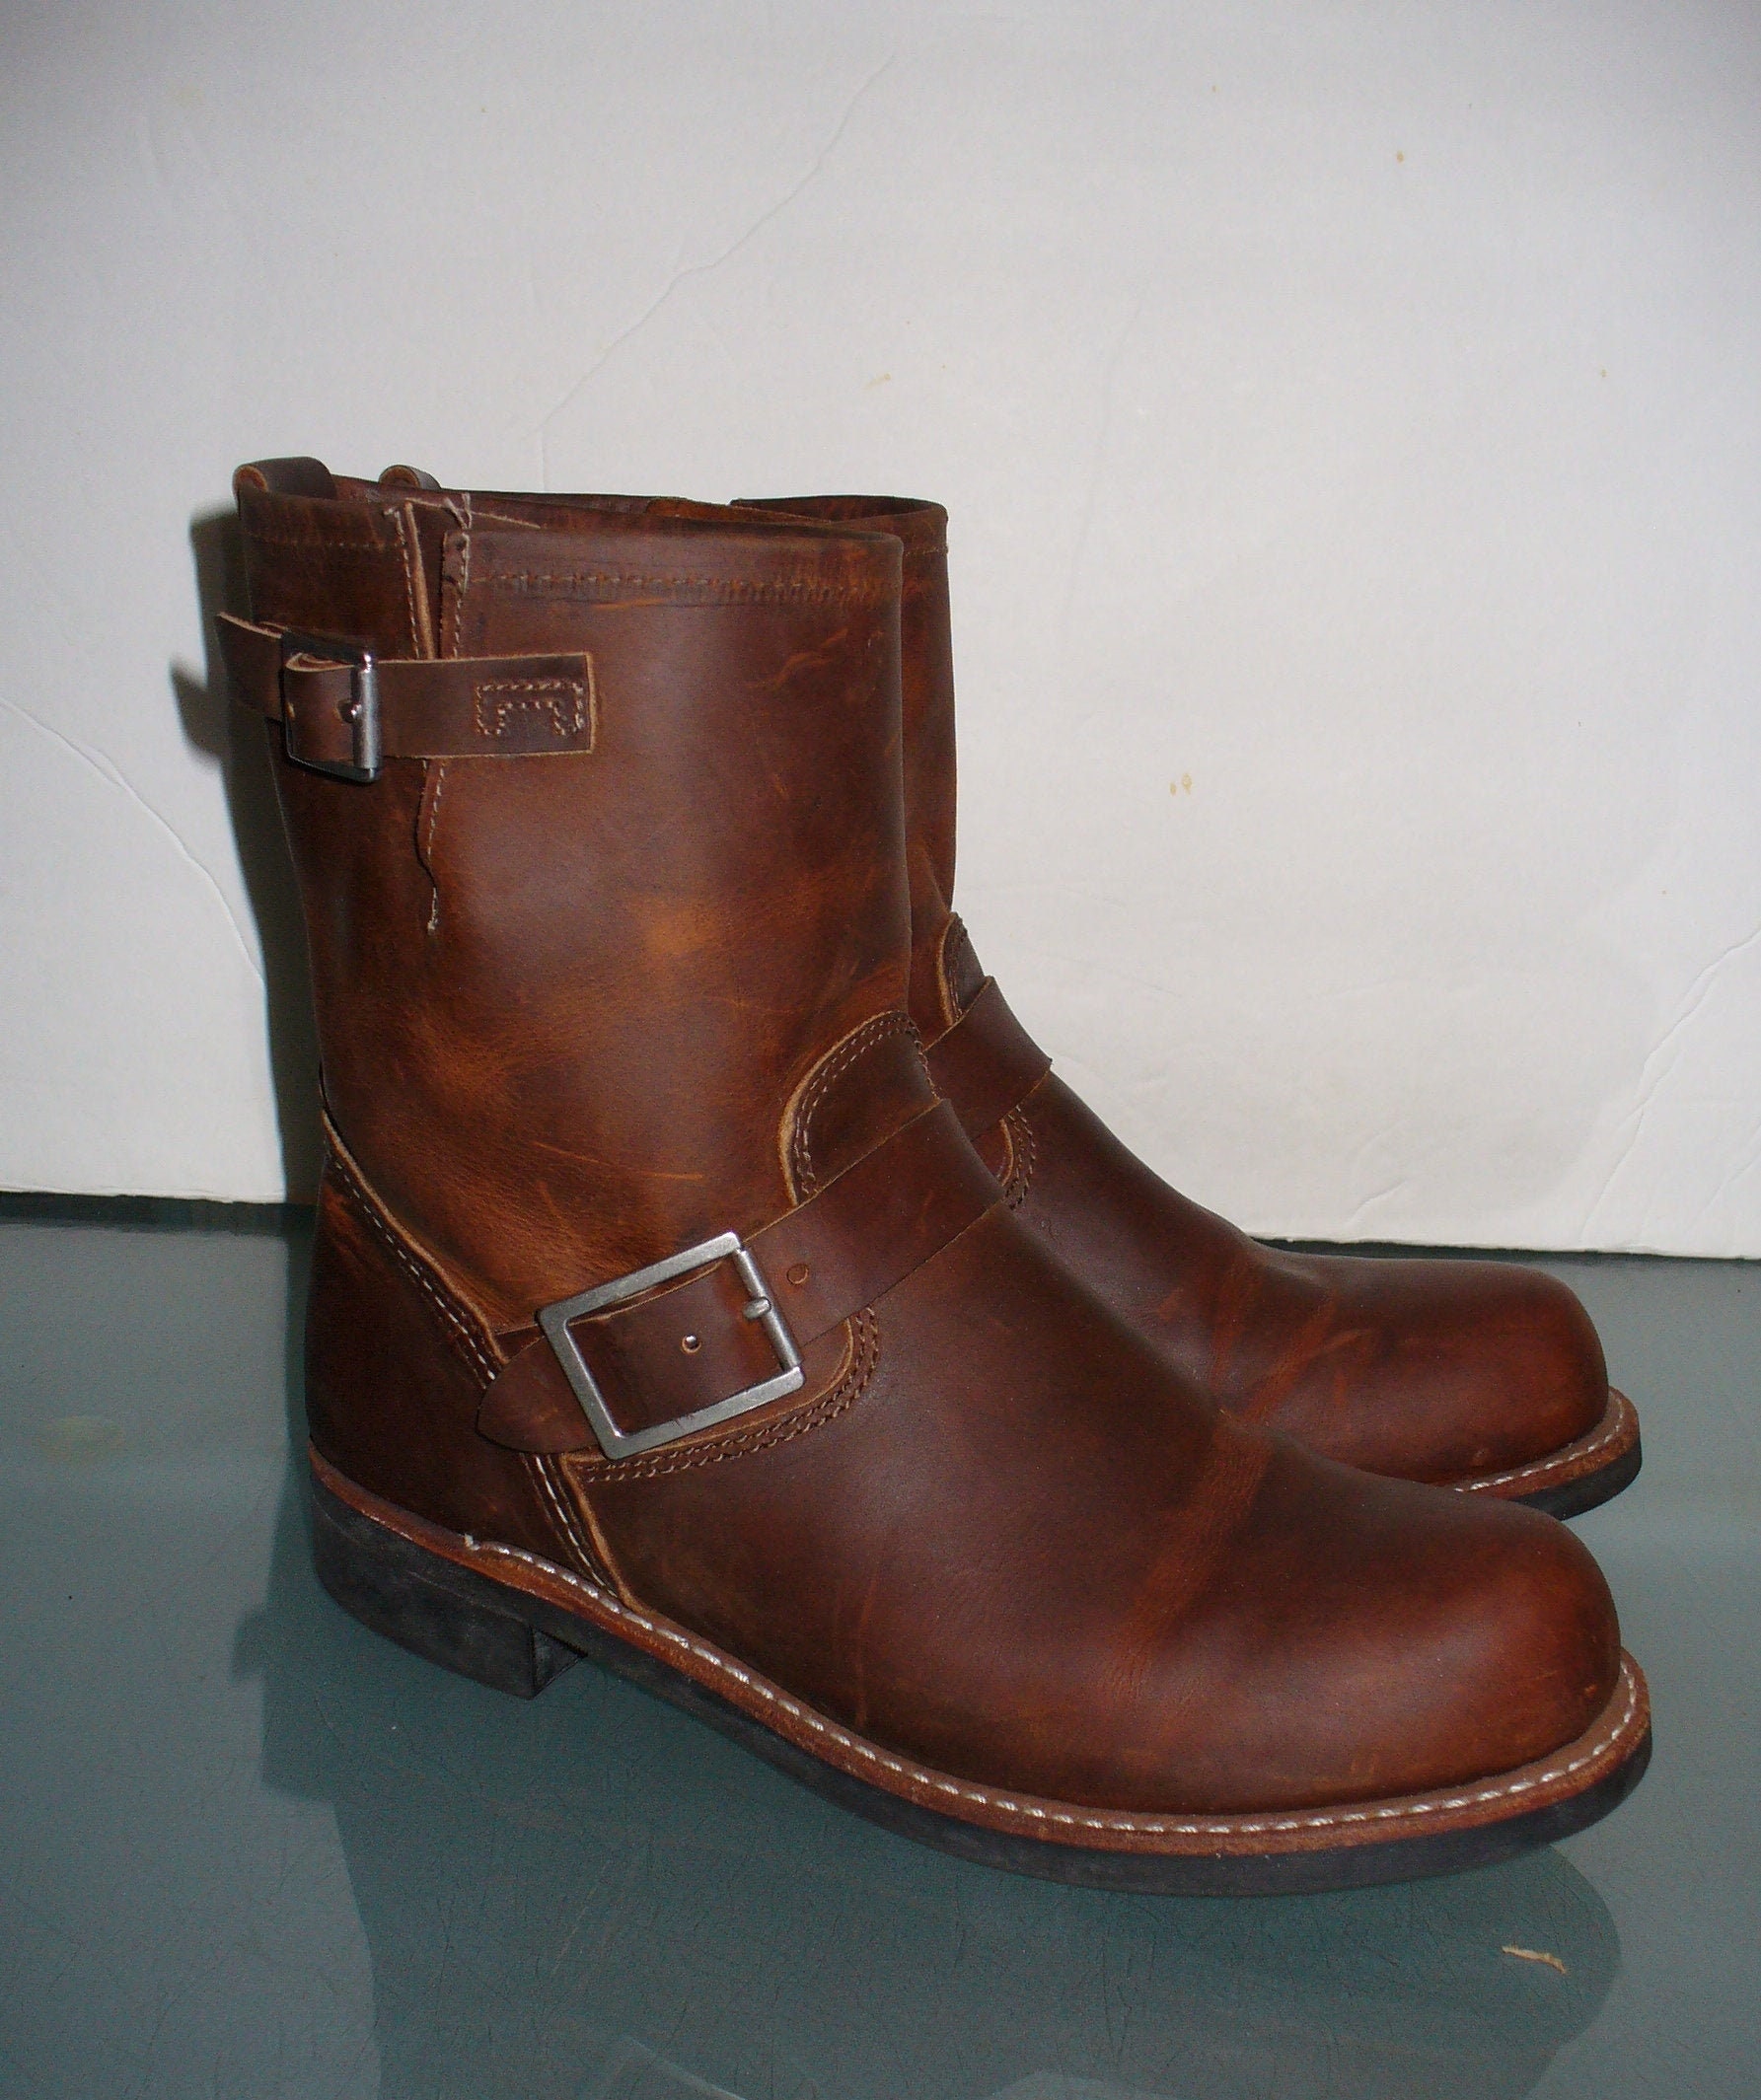 Red Wing Engineer Boots With Buckle Straps 8.5 B